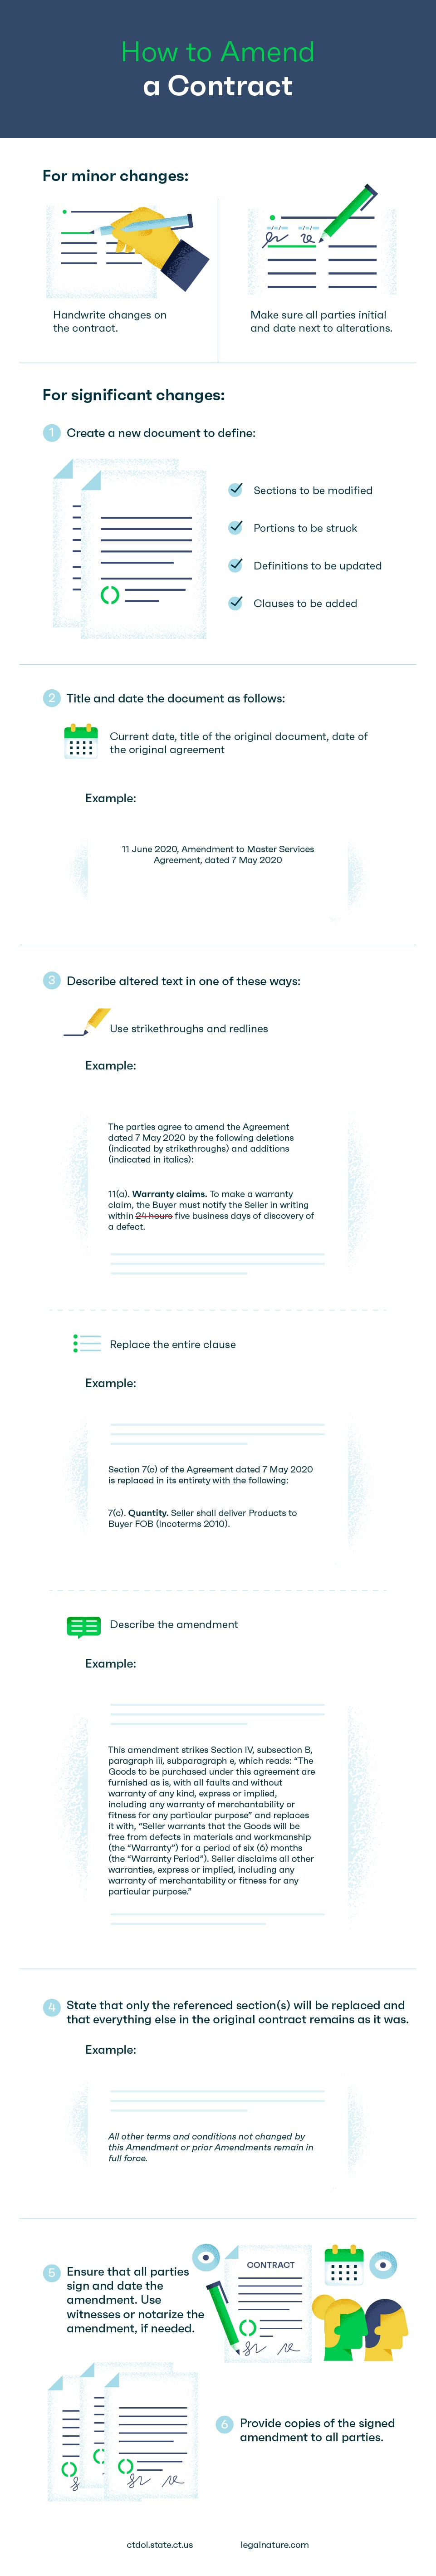 How to Amend a Contract Infographic